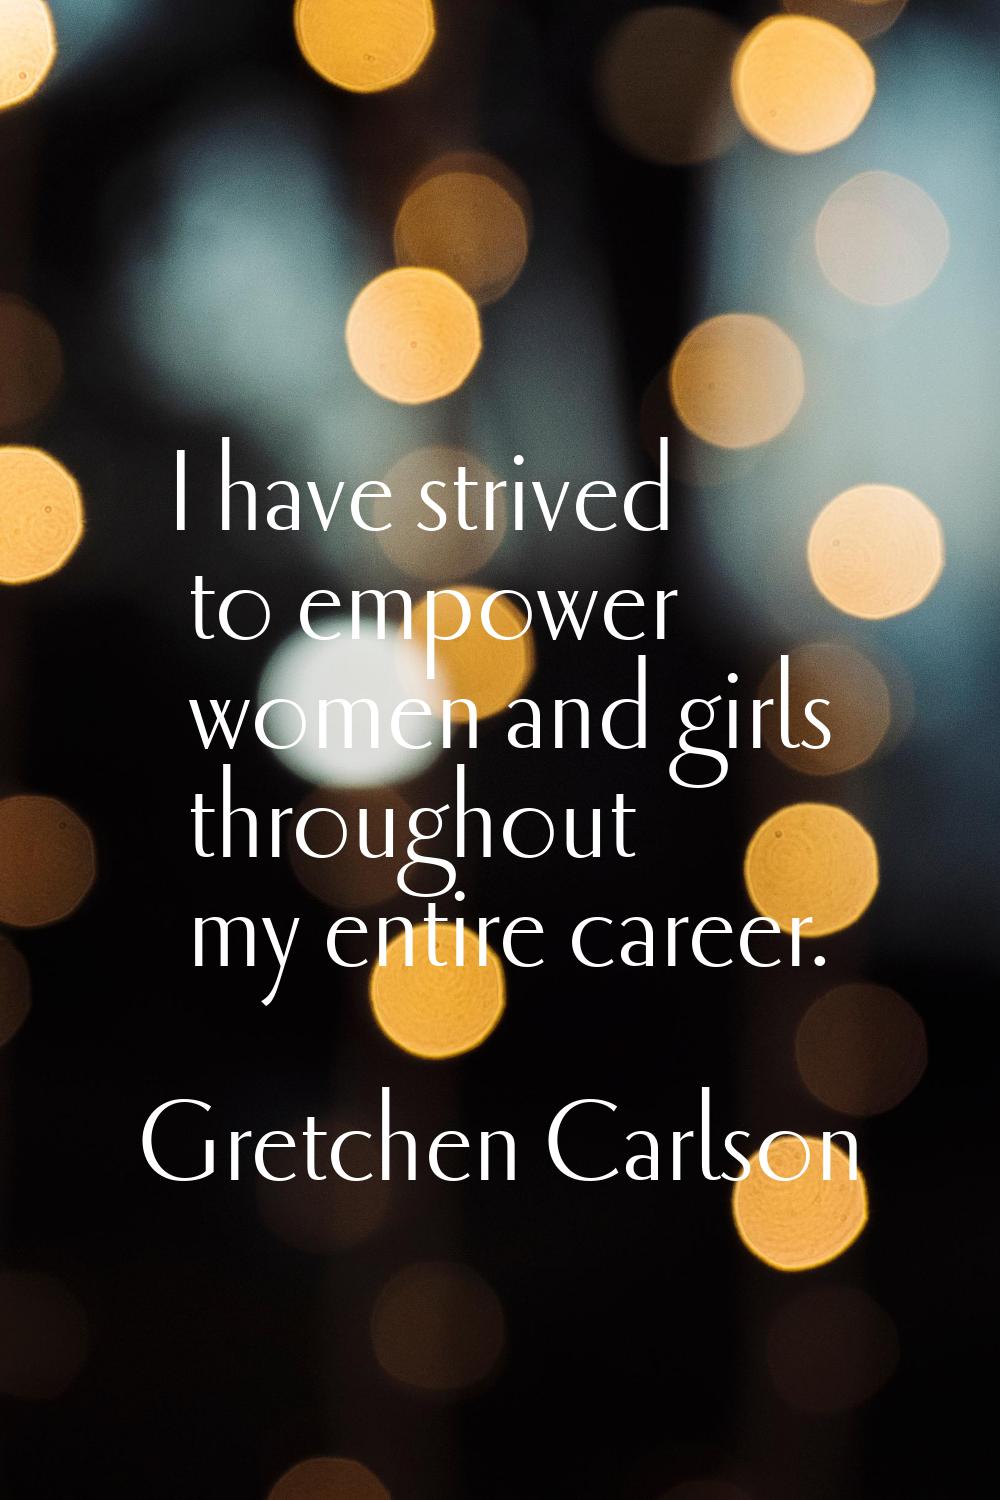 I have strived to empower women and girls throughout my entire career.